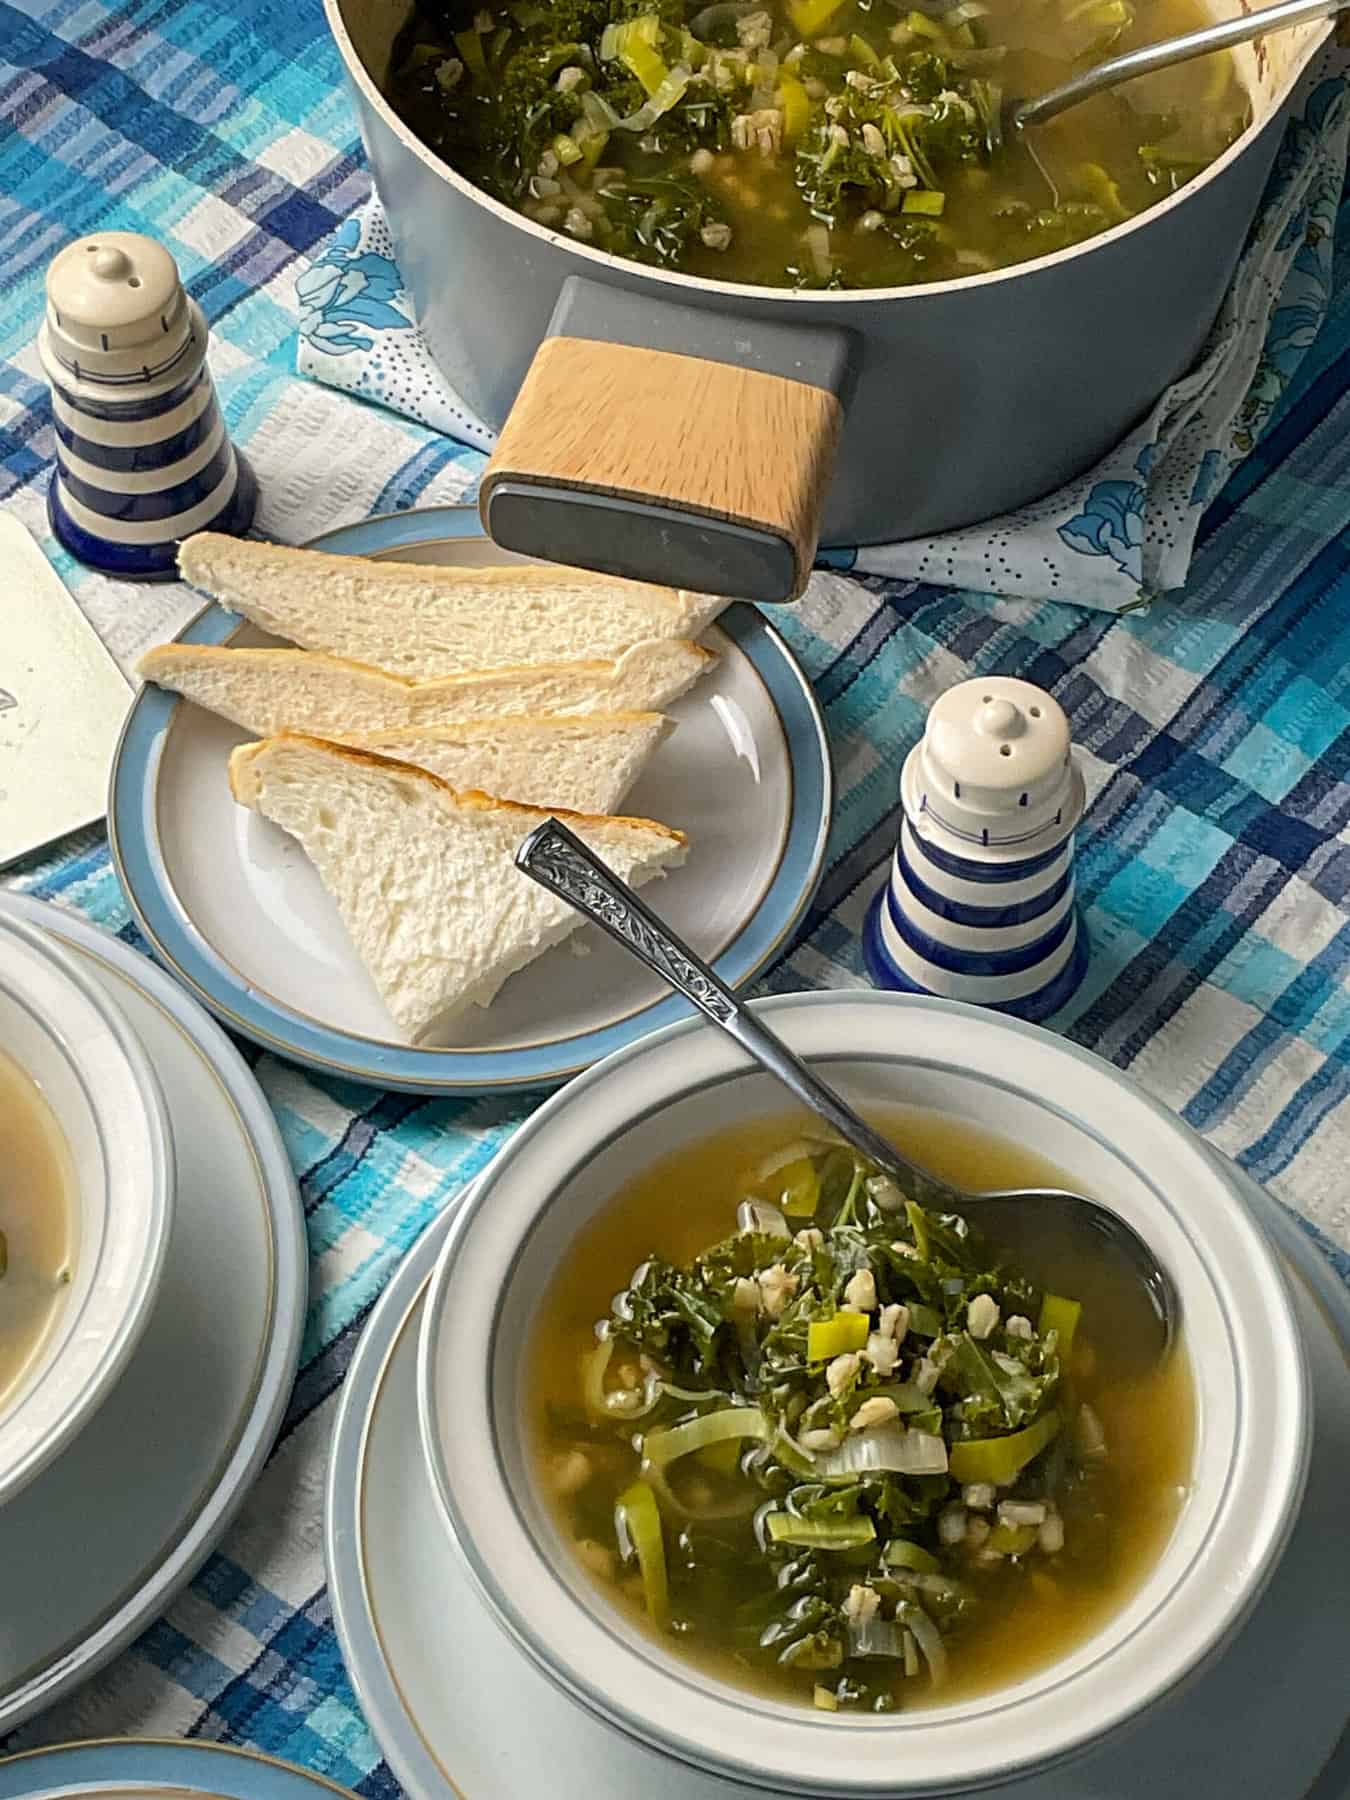 A table setting with a bowl of barley kale broth, small plate with bread slices, blue and white salt and pepper shakers, soup pot in background and a blue stripe table cloth.